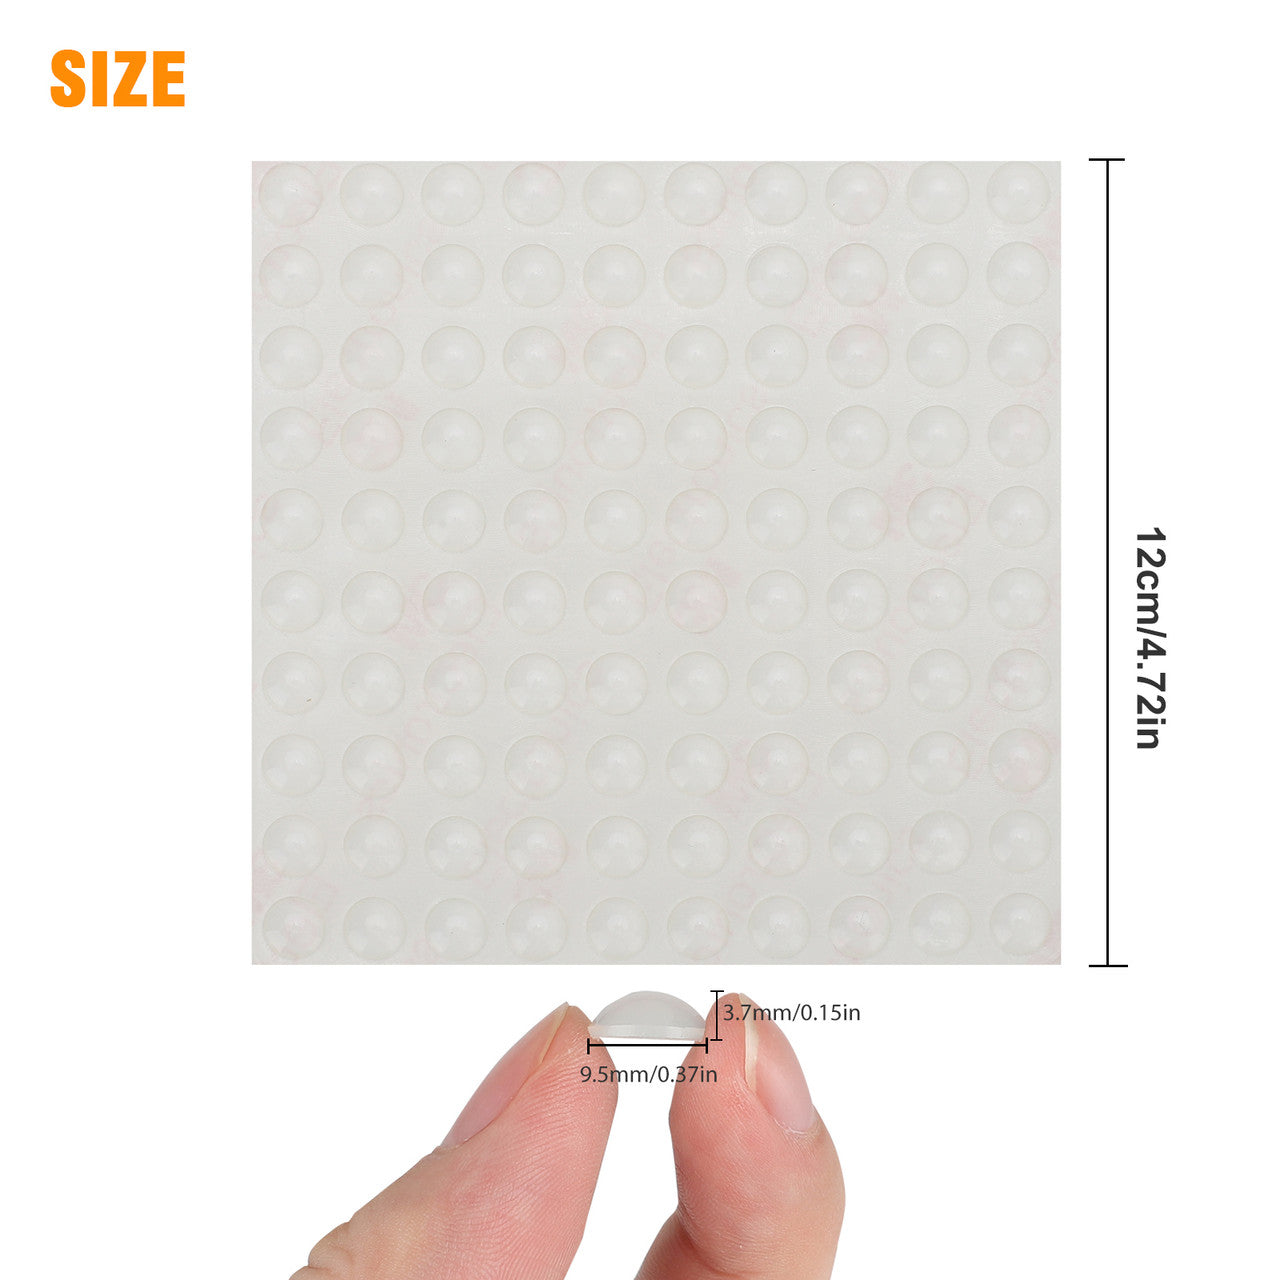 Cabinet Rubber Bumpers, Circular Dots Shaped Self Adhesive Bumper Pads Feet, Noise Dampening Buffer Pads, Sound Dampening Clear Cabinet Door Drawer Bumpers, Picture Frames, Cutting Boards 100 PCS